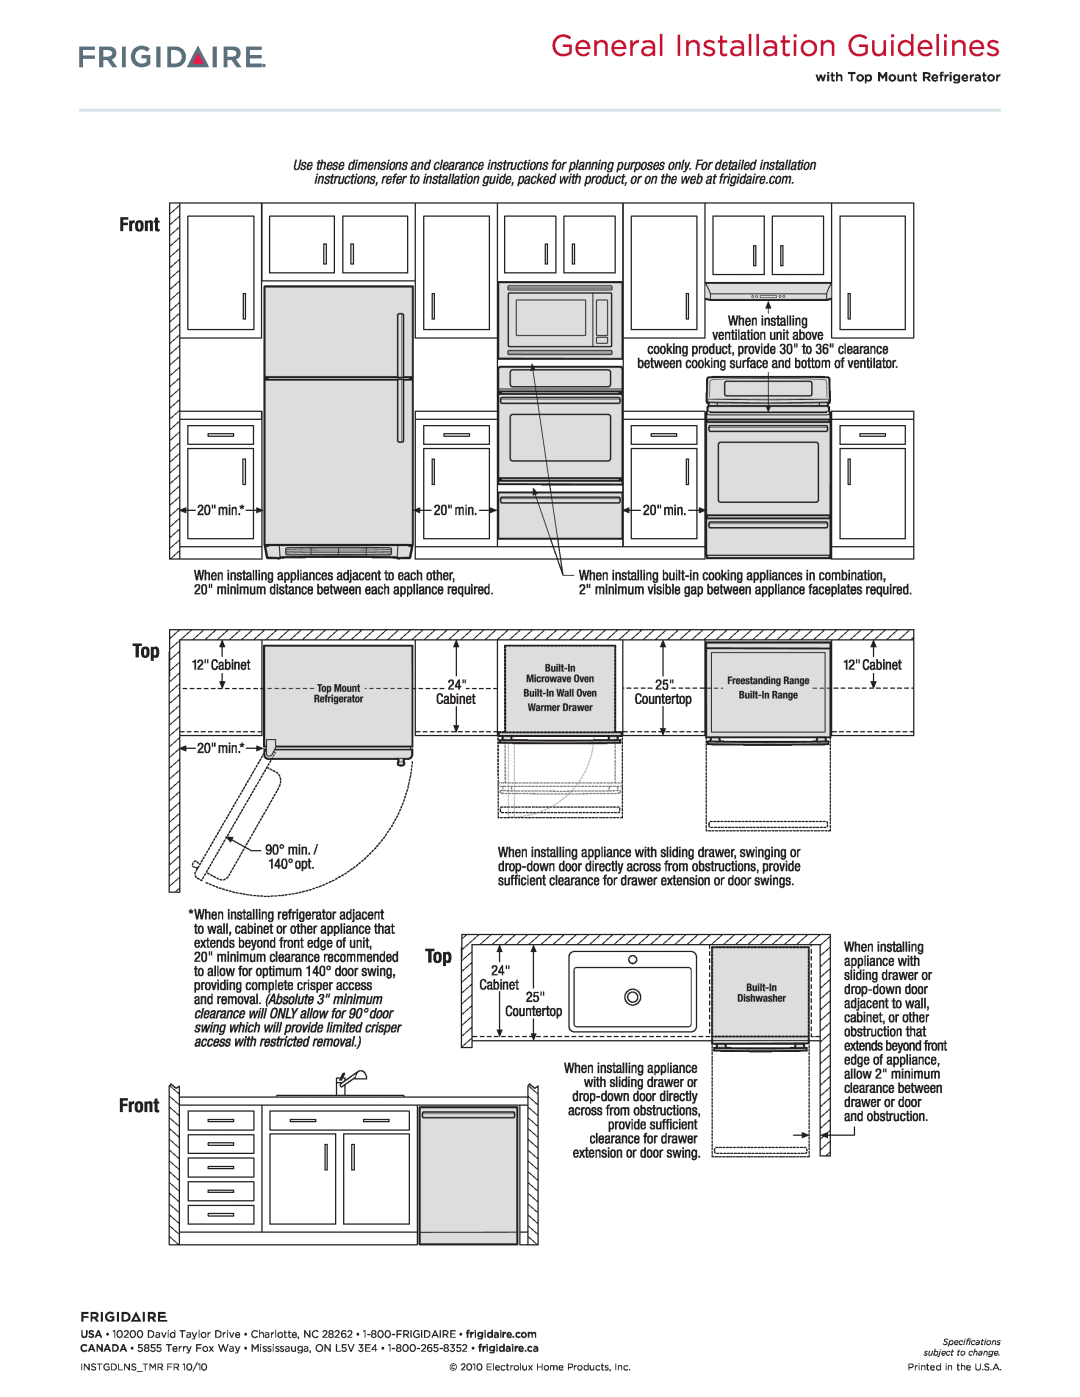 Frigidaire FGB24L2E C dimensions General Installation Guidelines, Top Front, with Top Mount Refrigerator 